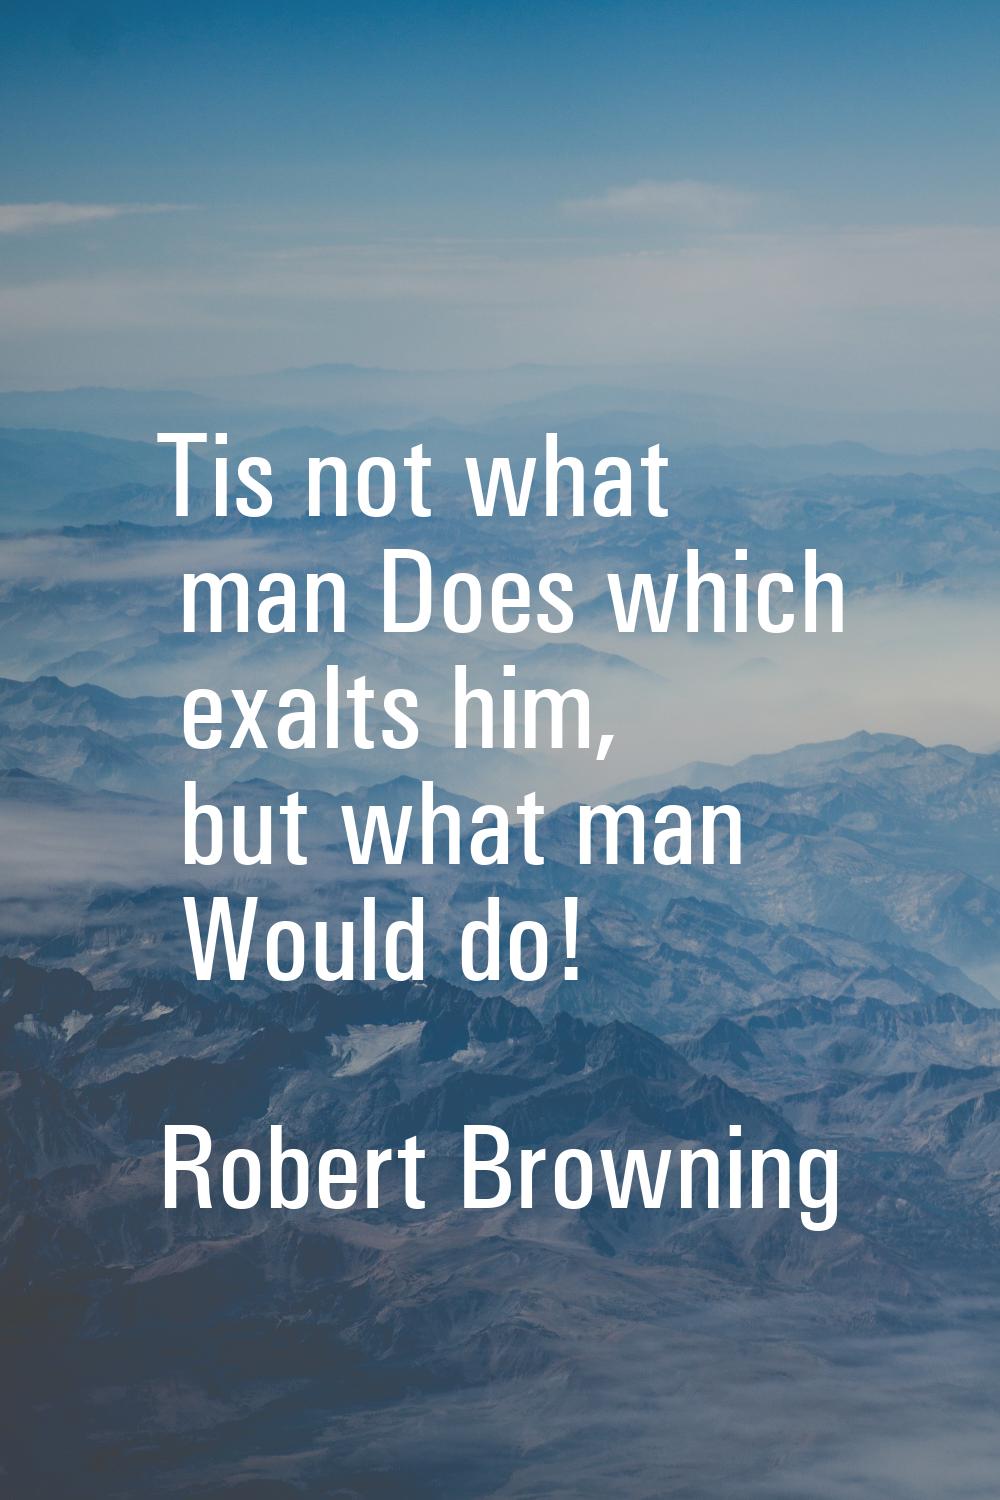 Tis not what man Does which exalts him, but what man Would do!